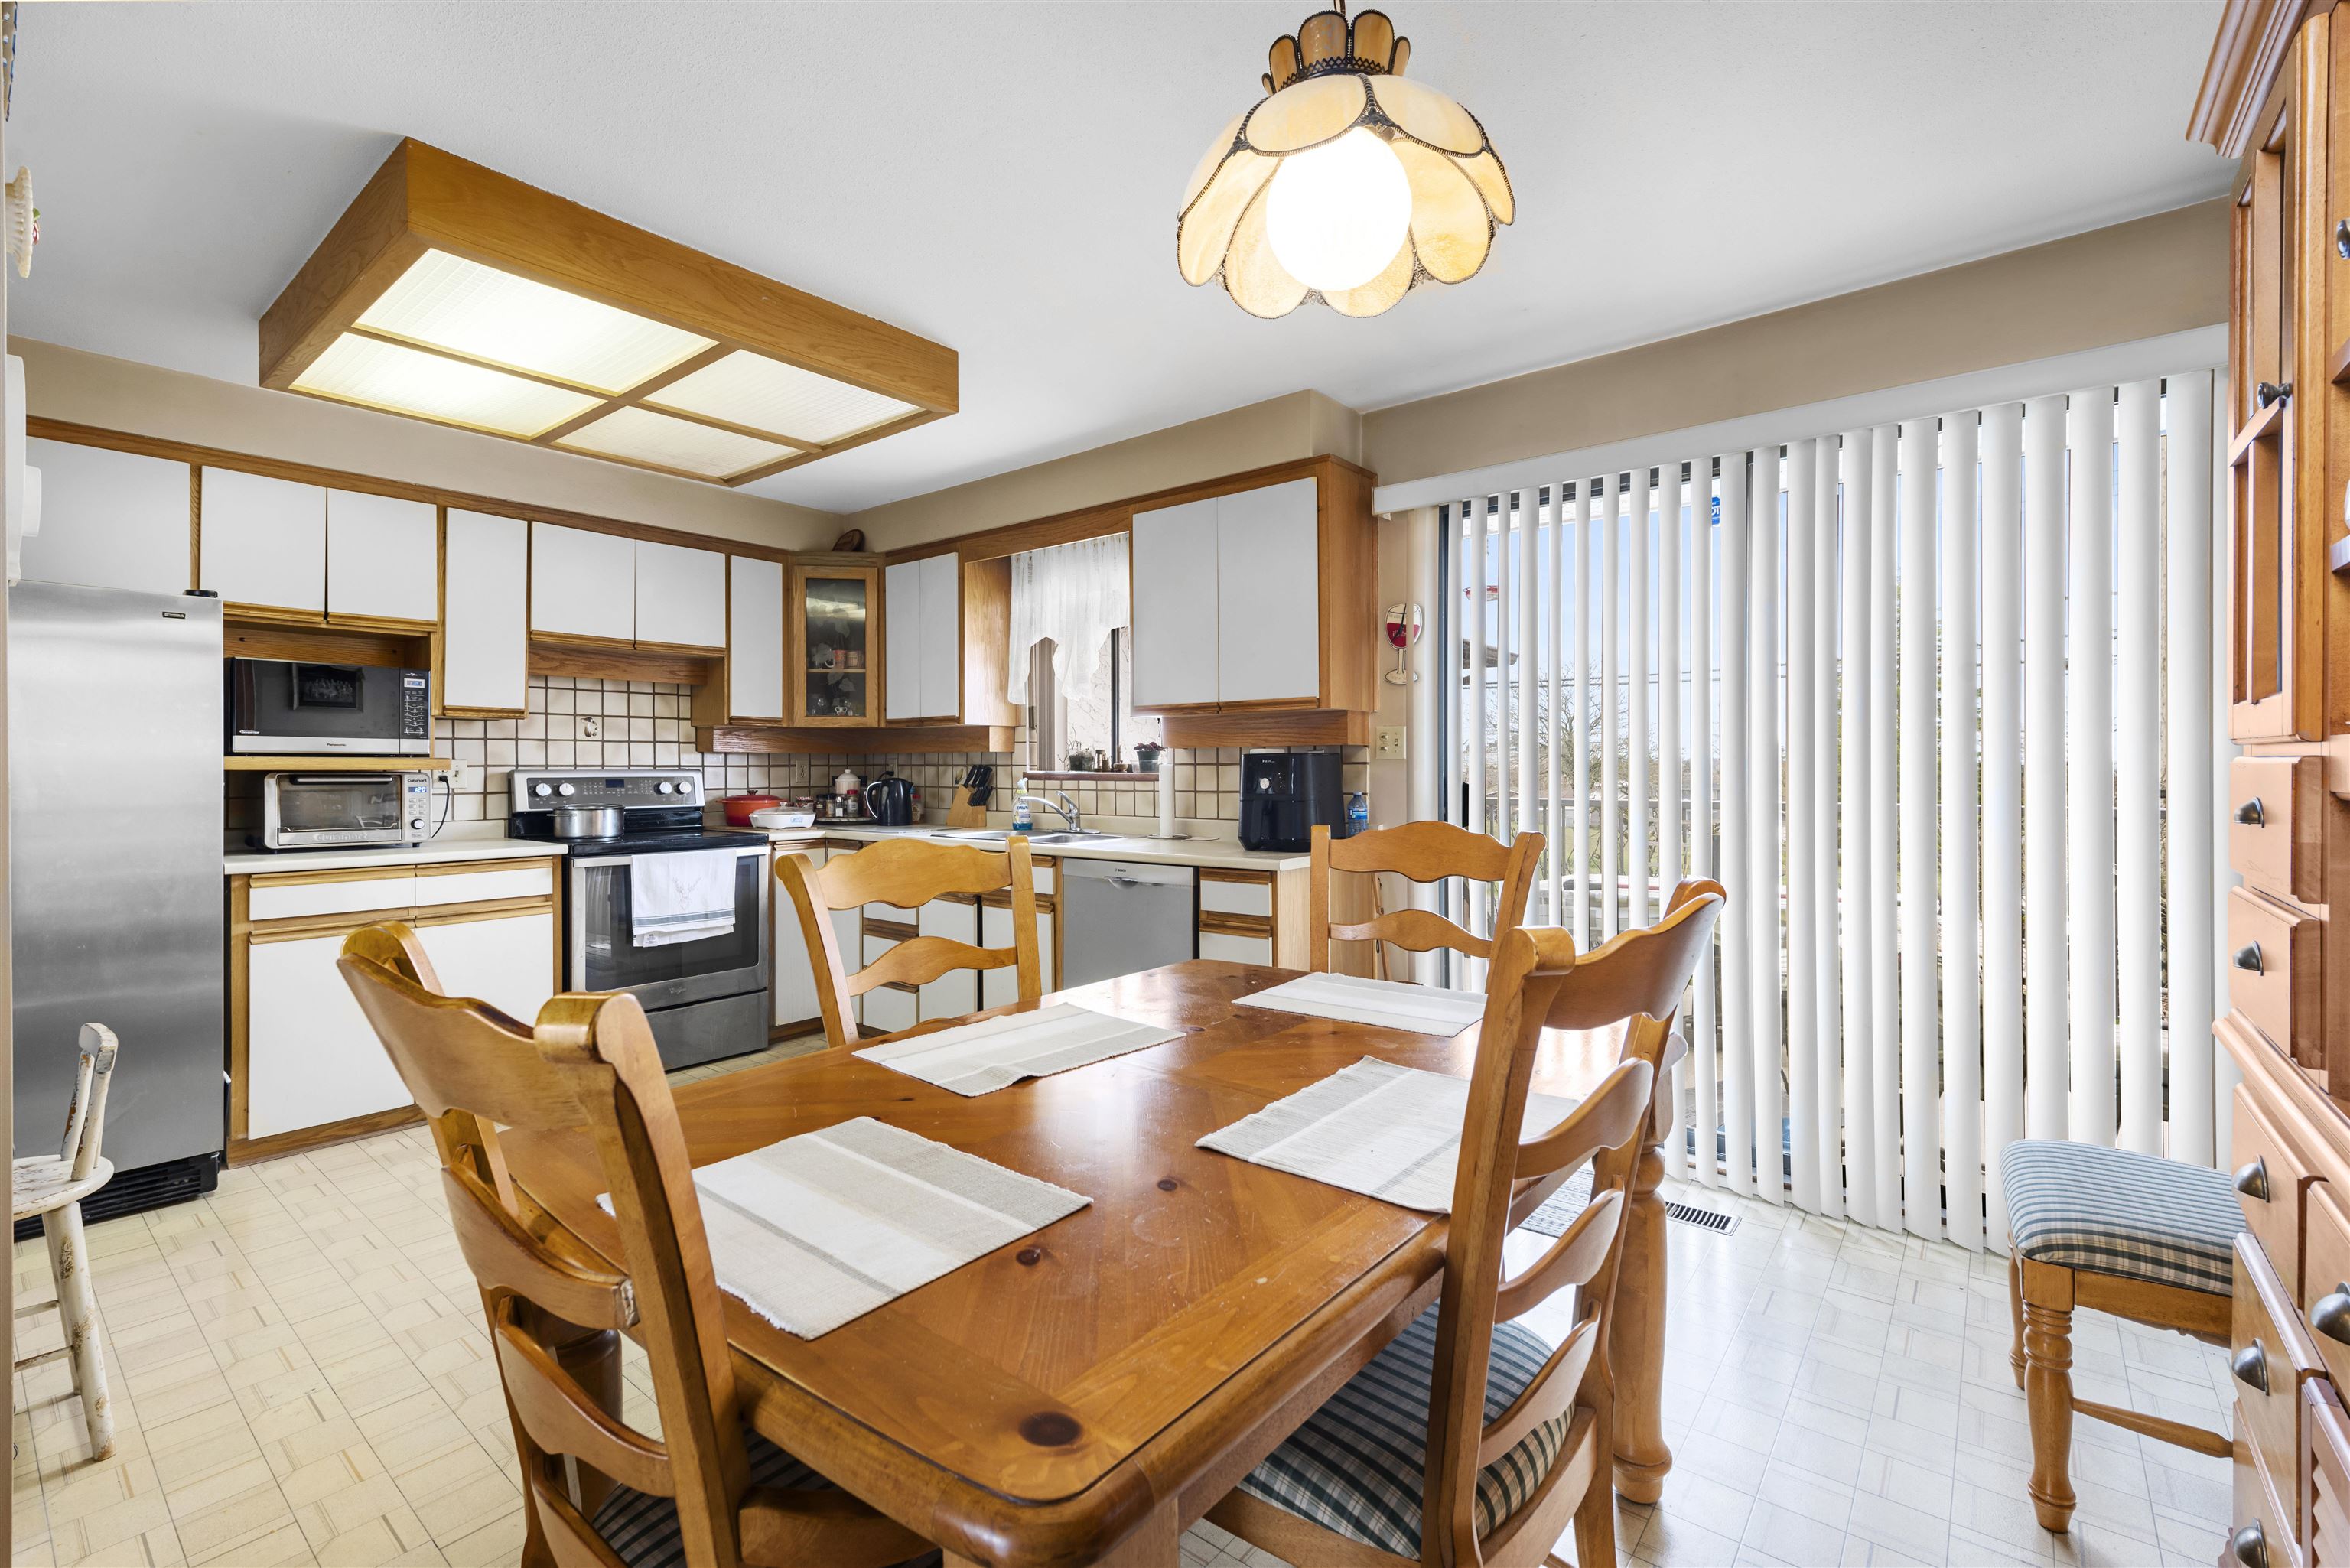 Listing image of 3481 DIEPPE DRIVE